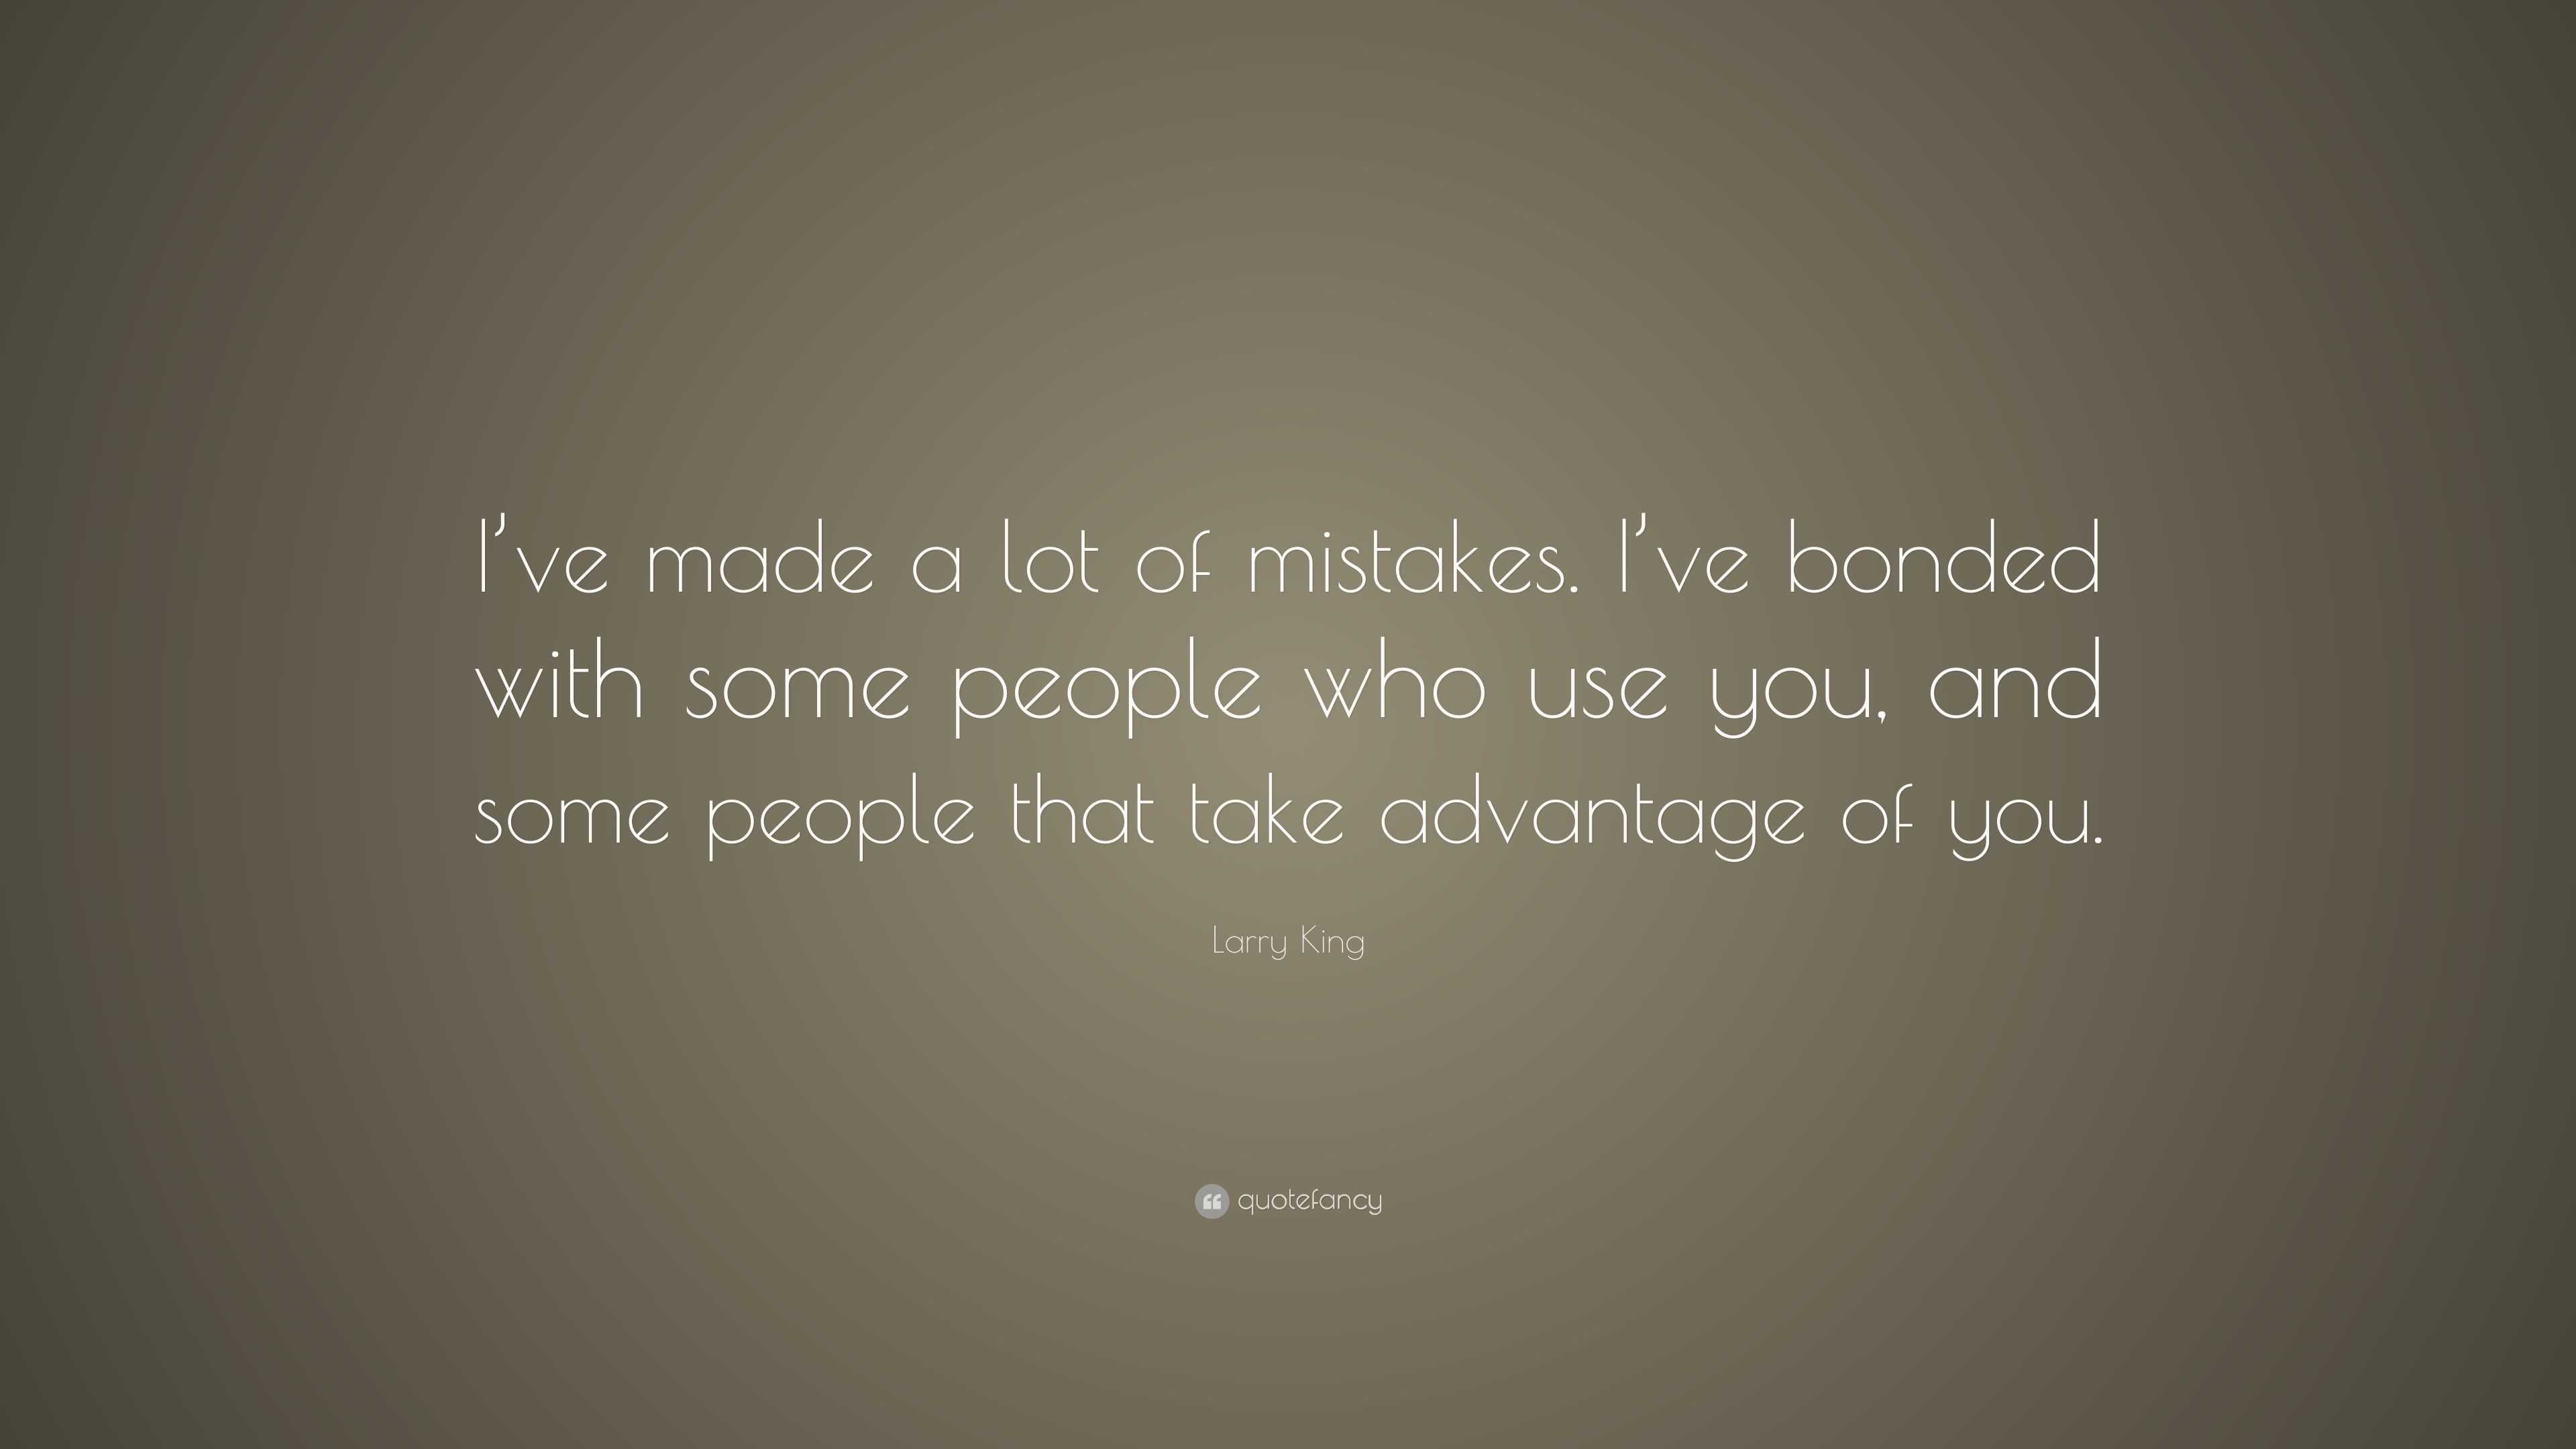 Larry King Quote: “I’ve made a lot of mistakes. I’ve bonded with some ...